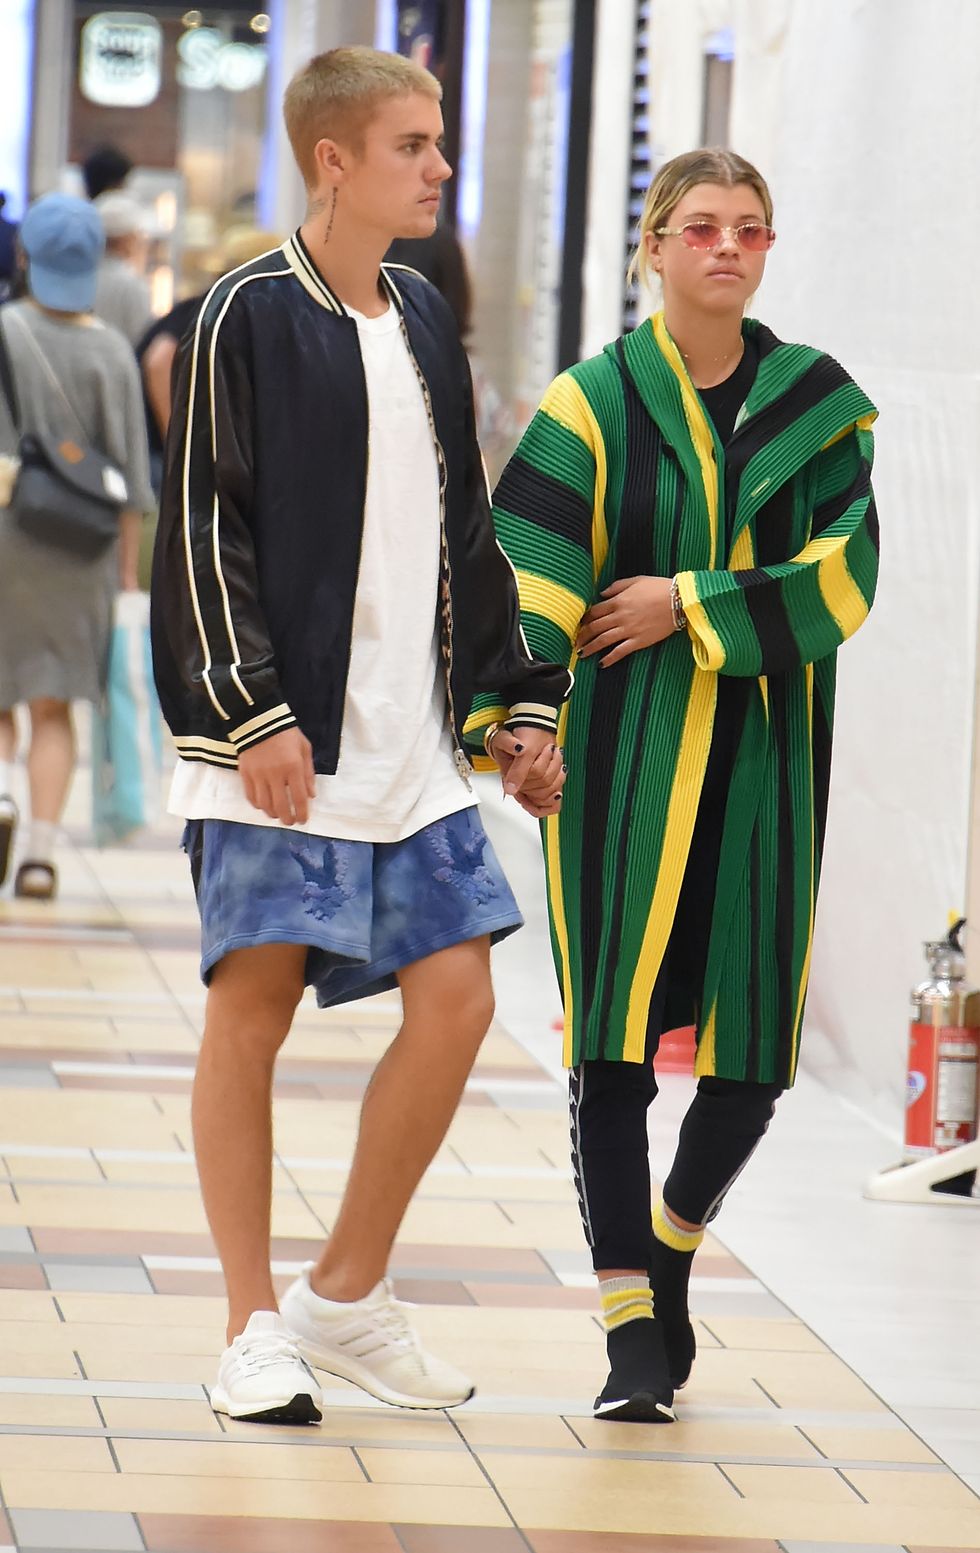 justin bieber and sofia richie sighting in tokyo